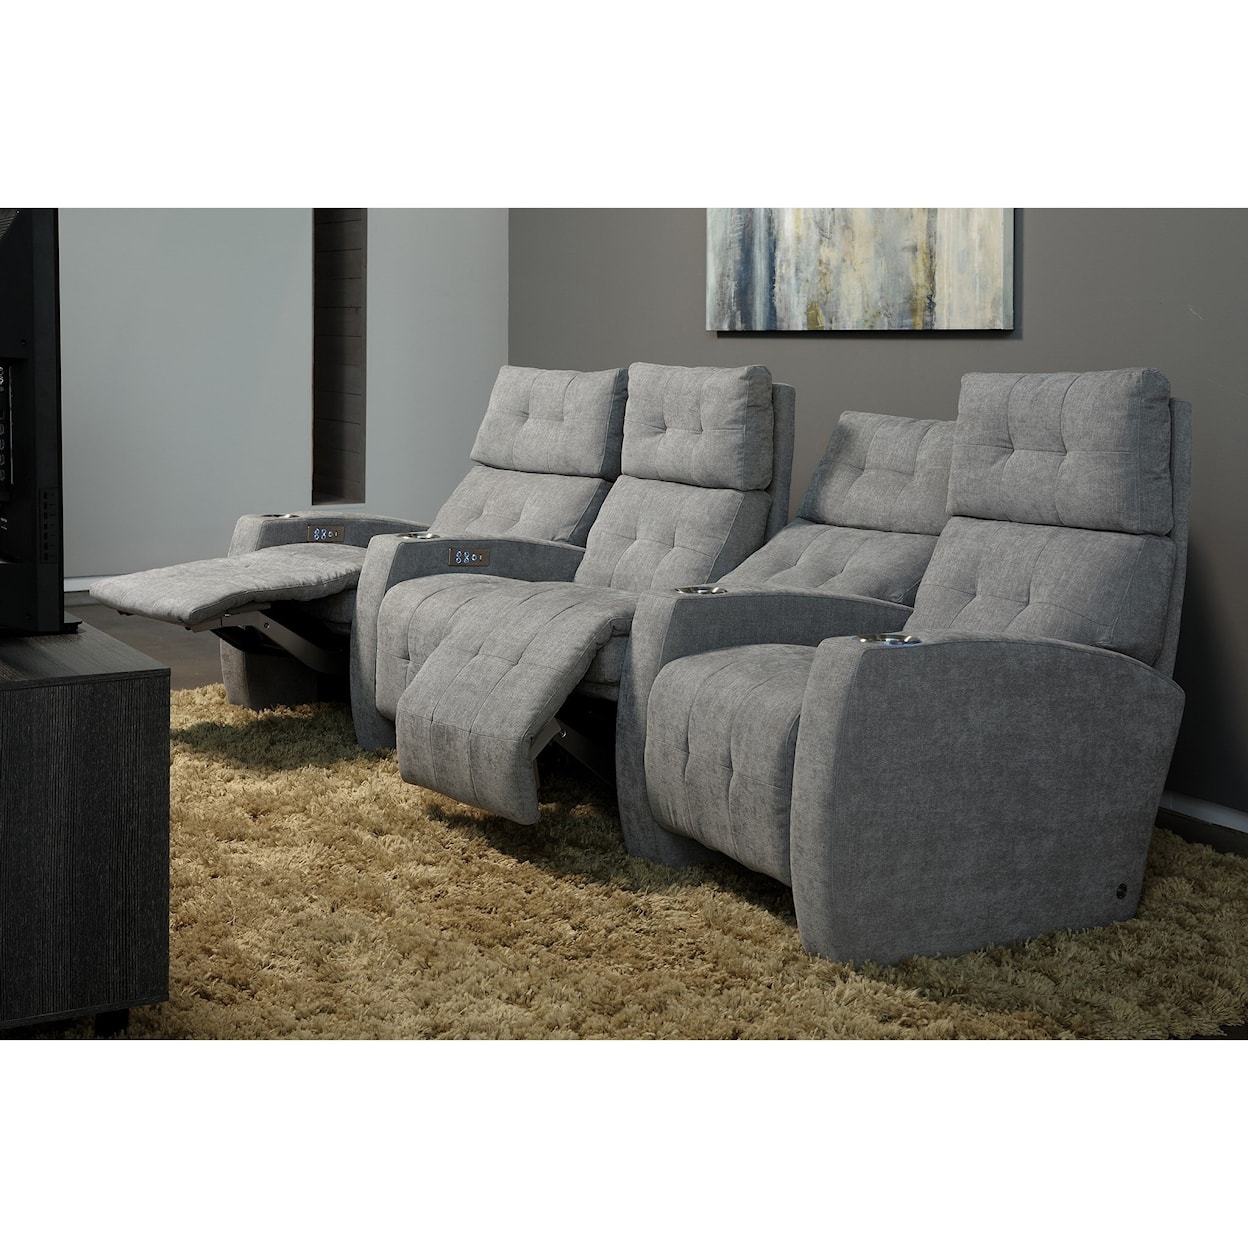 American Leather Dean Power Reclining Theater Seating